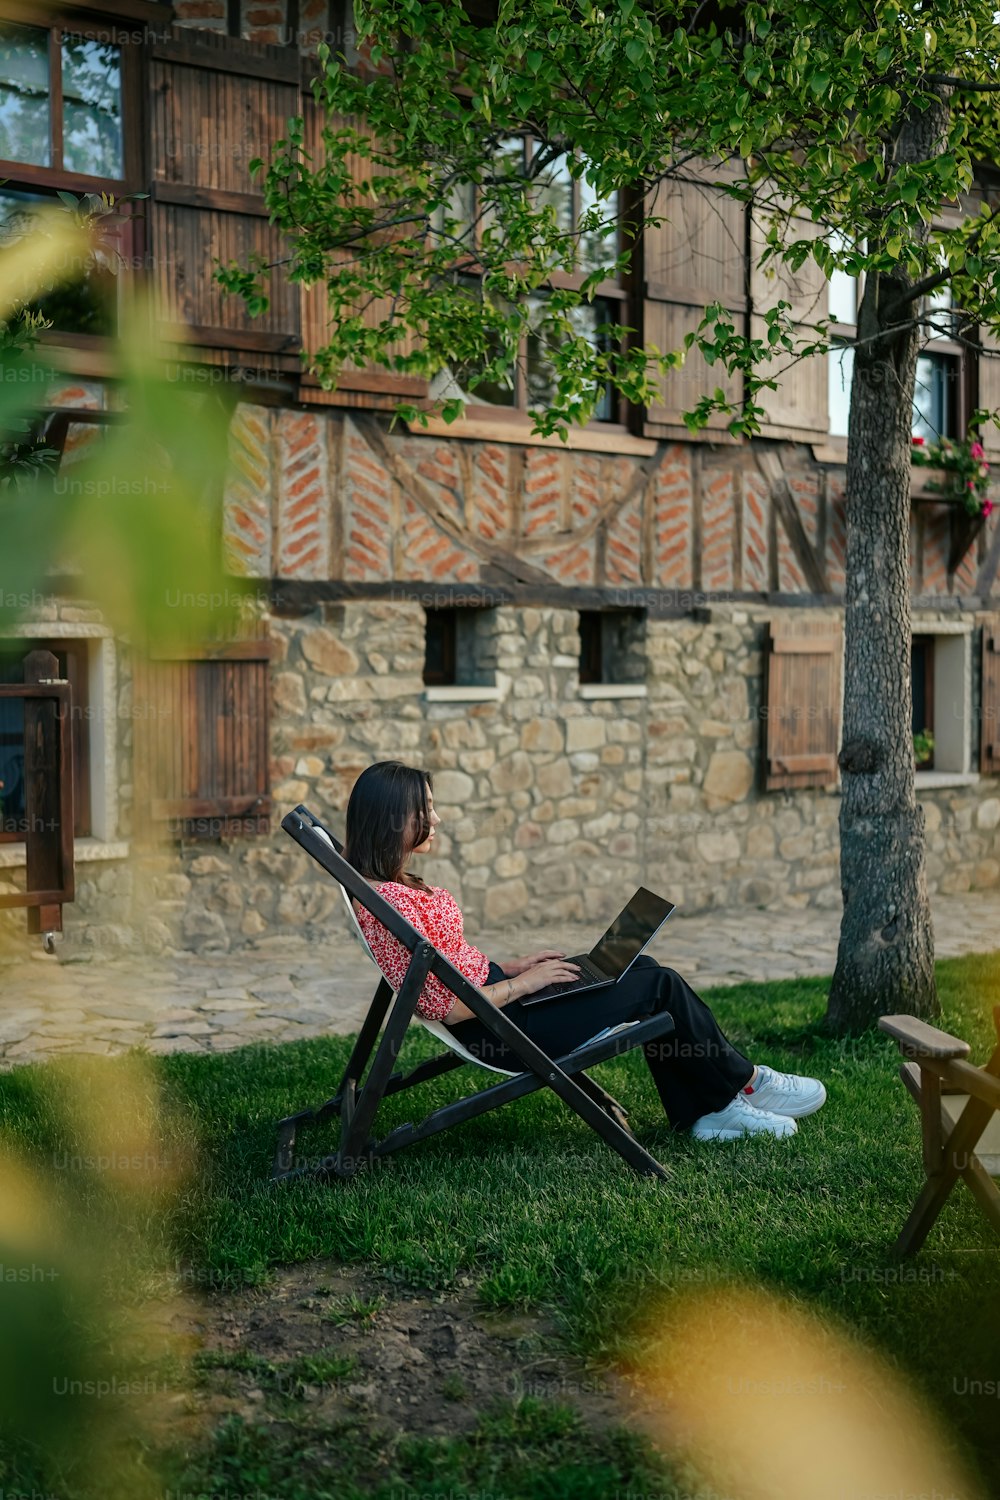 a woman sitting on a lawn chair in front of a building